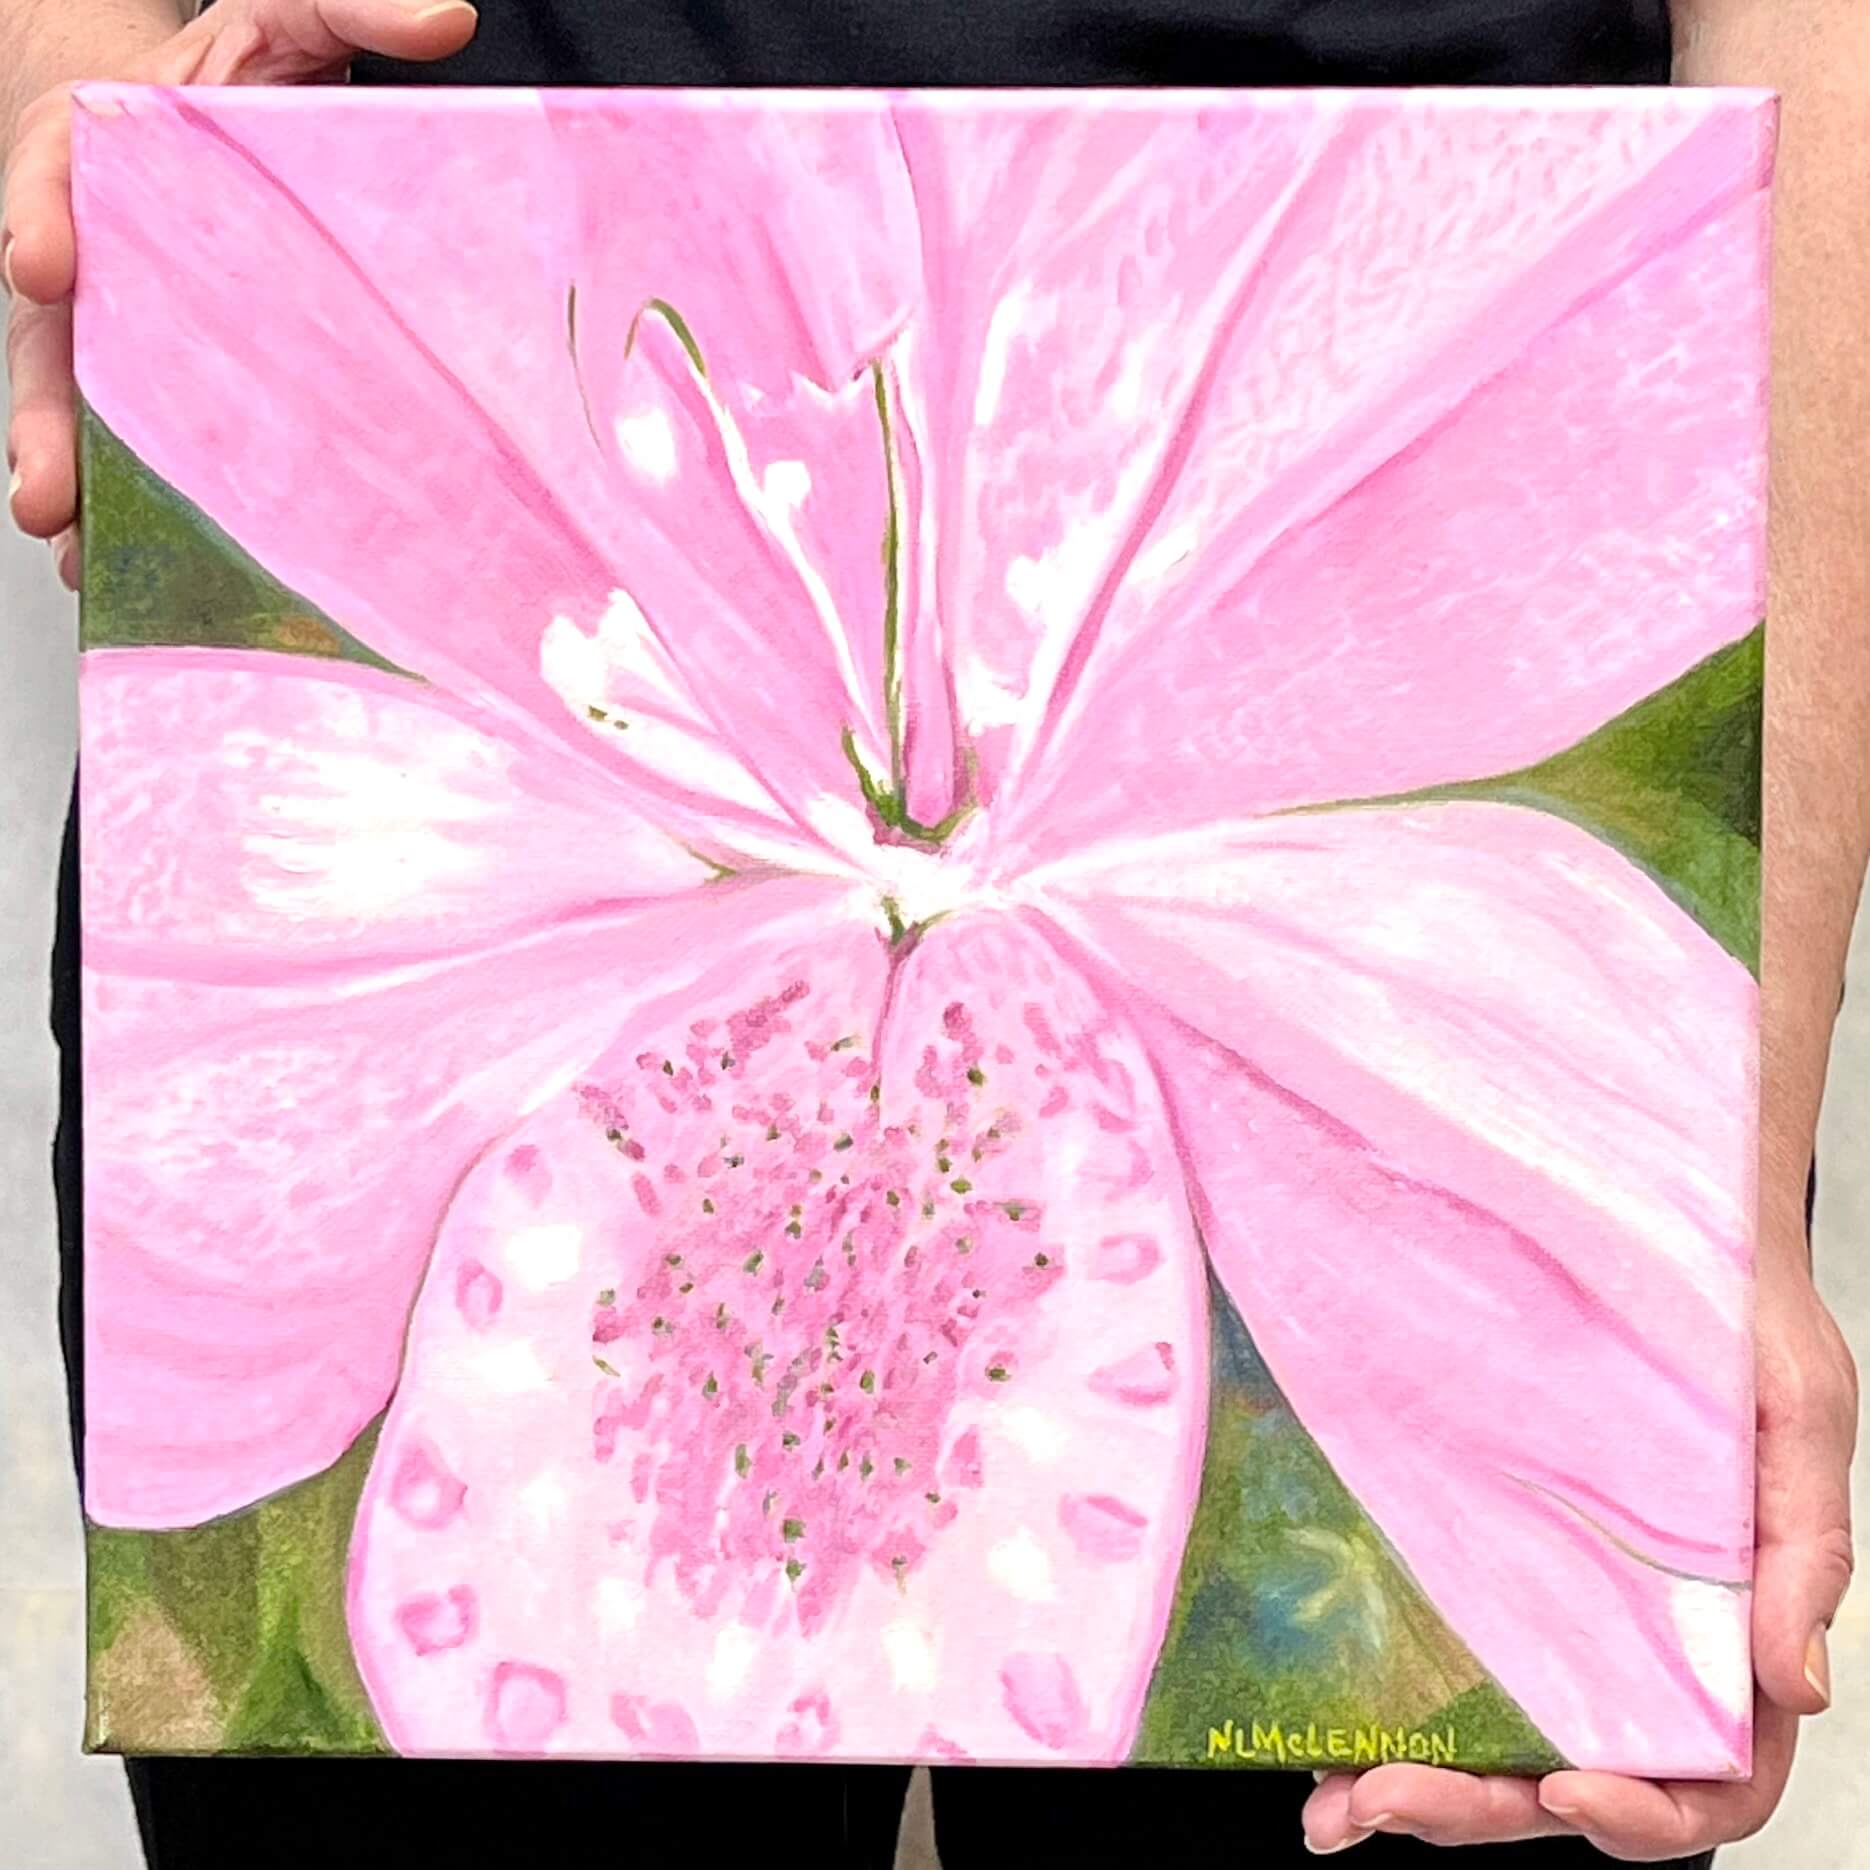 A painting, by fine artist Nancy McLennon, of light pink lily in a green garden background being held by artist